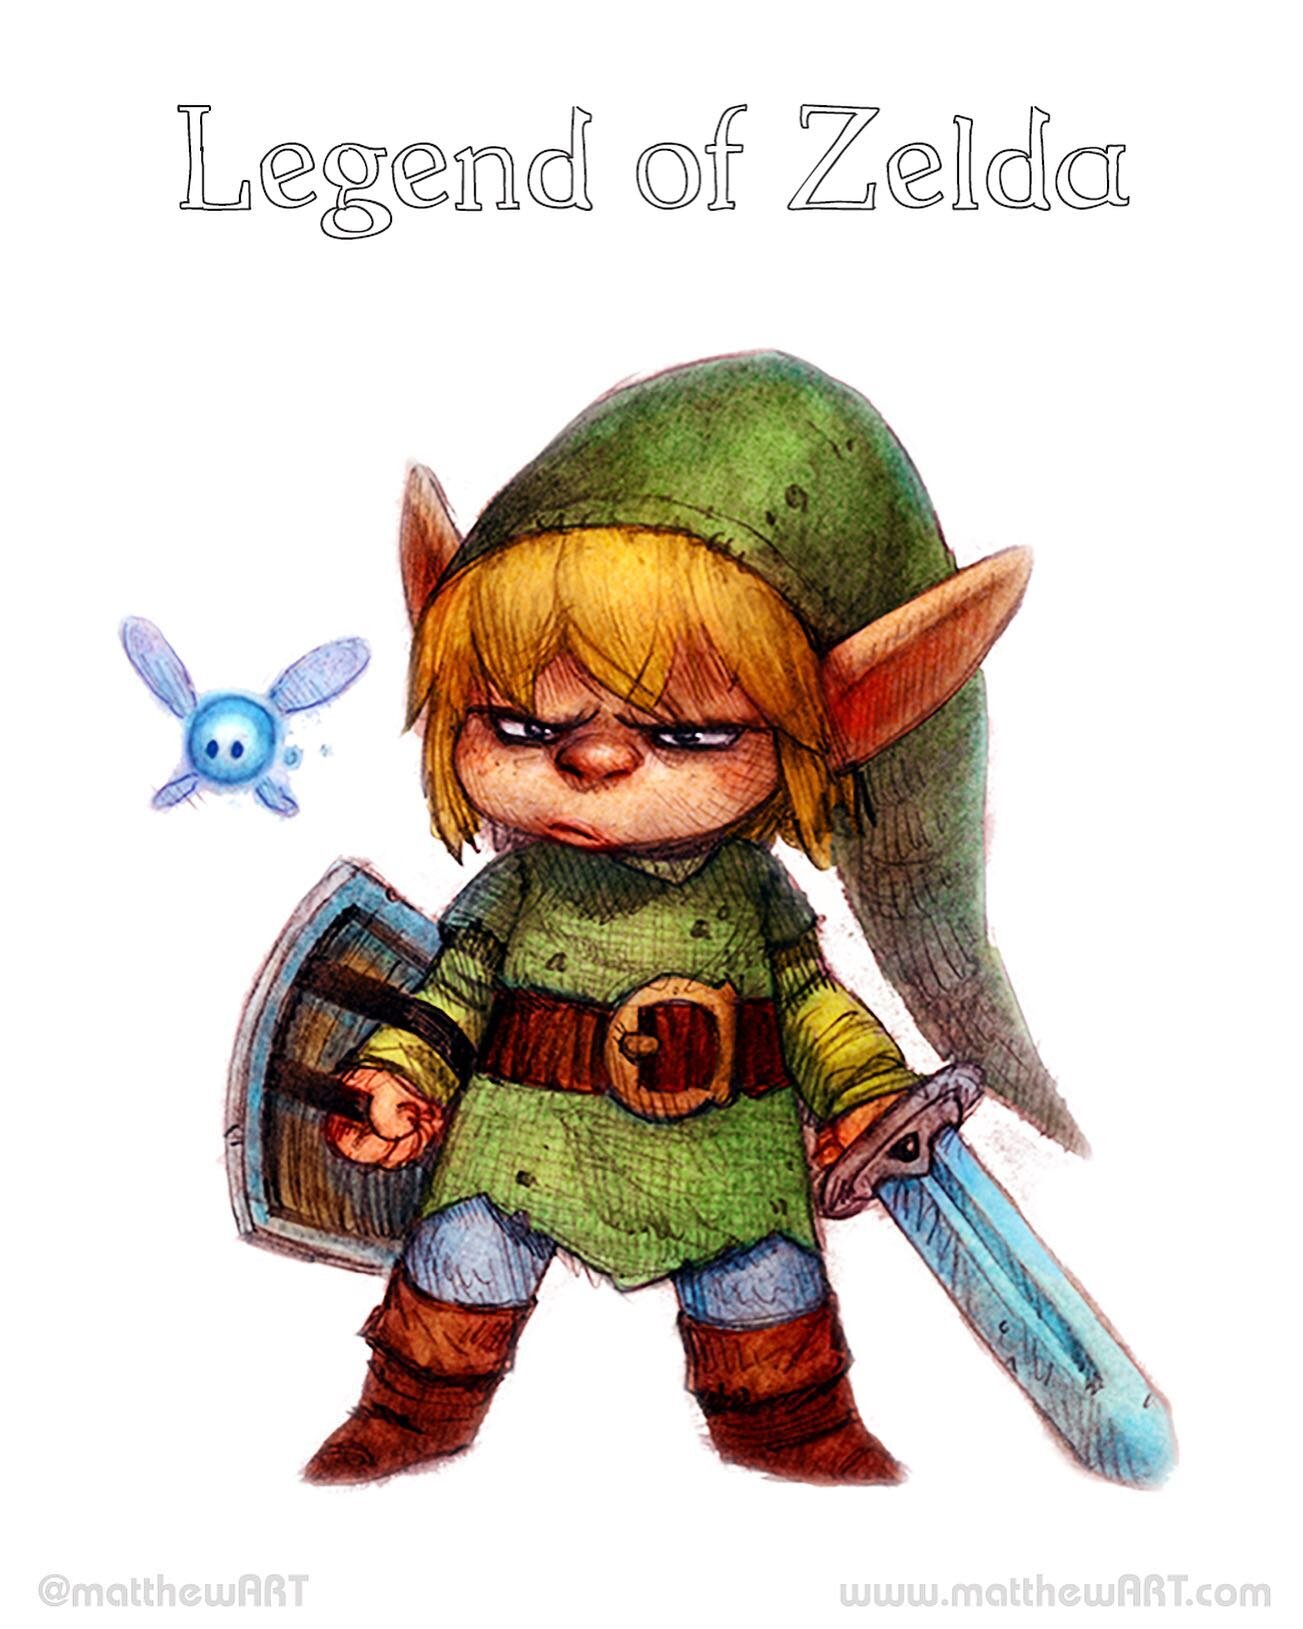 The Legend of Zelda:
GRUMPY LINK!  More better version :)
&bull;
90s rap mode: &lt;beep&gt;

&quot;It's The Legend of Zelda and it's really rad!
Those creatures from Ganon are pretty bad!
Octoroks, tektites and leevers too
But with your help, our her